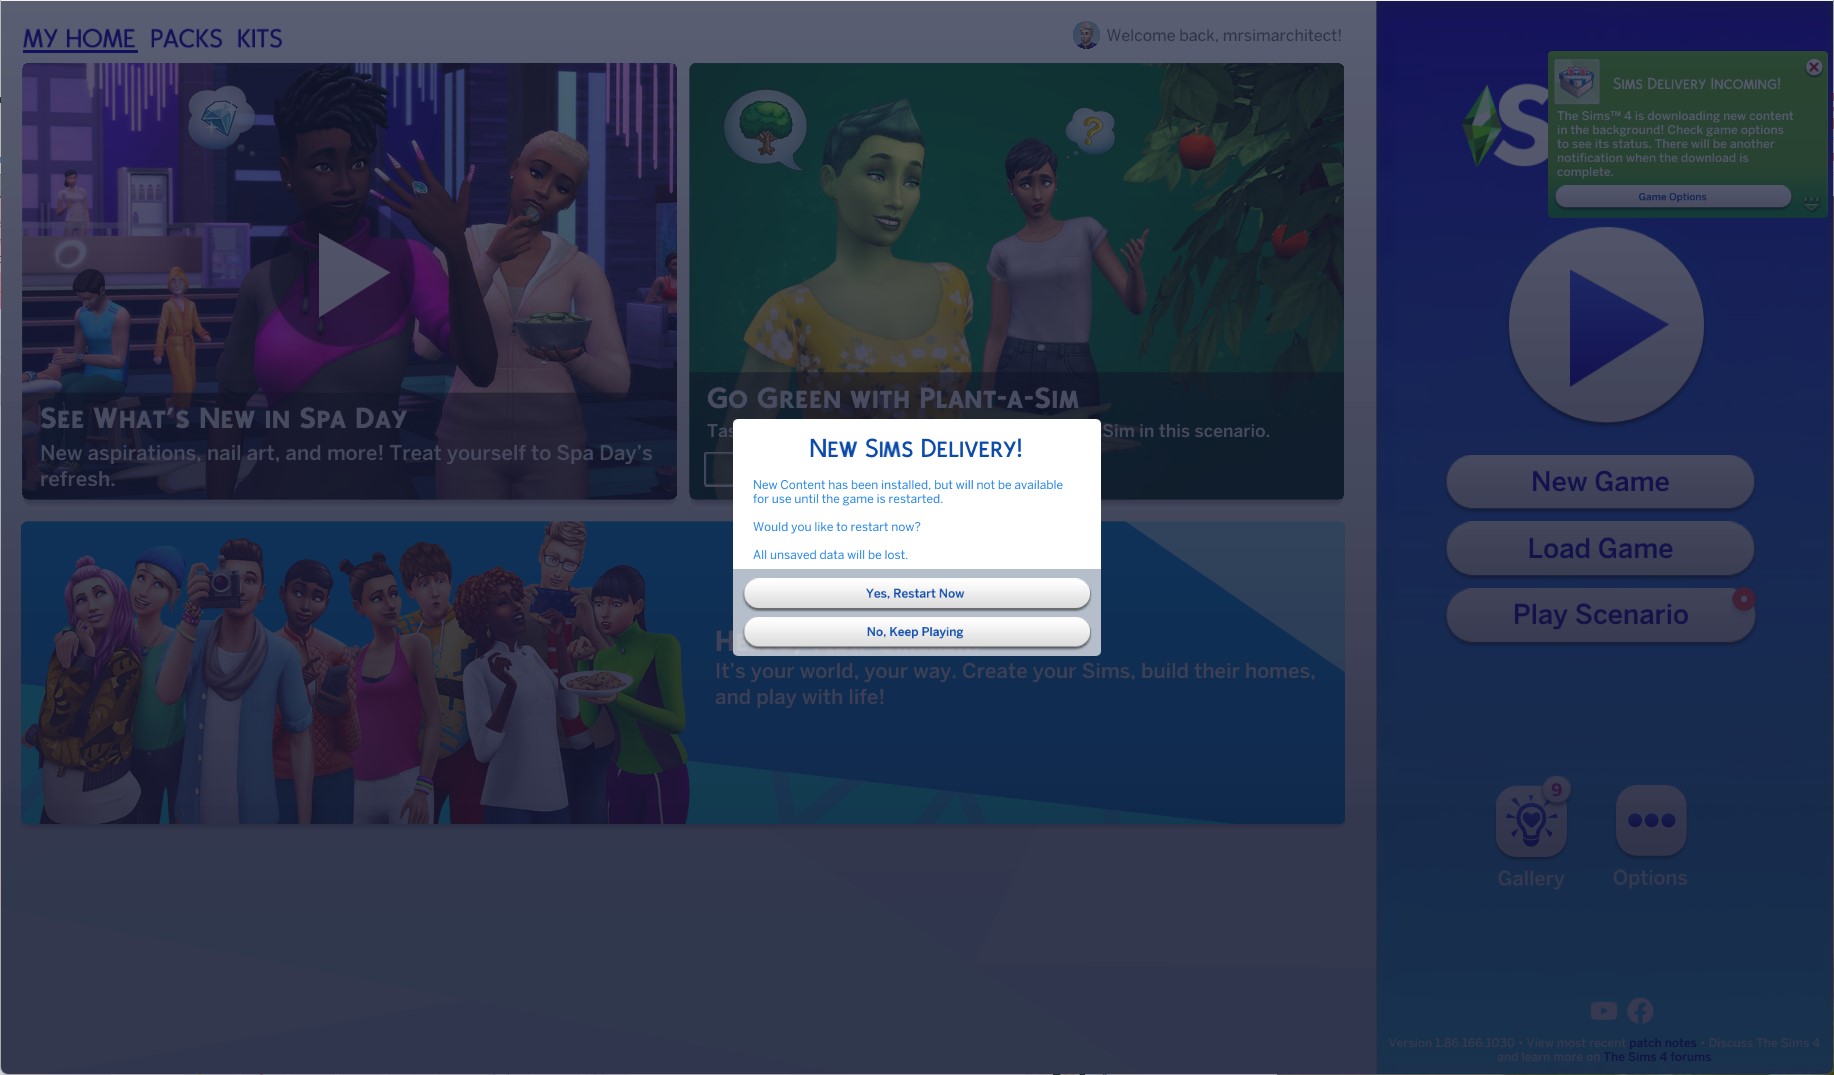 The Sims 4 Delivery Express 8.0.1 - June 13, 2022 - The Sim Architect